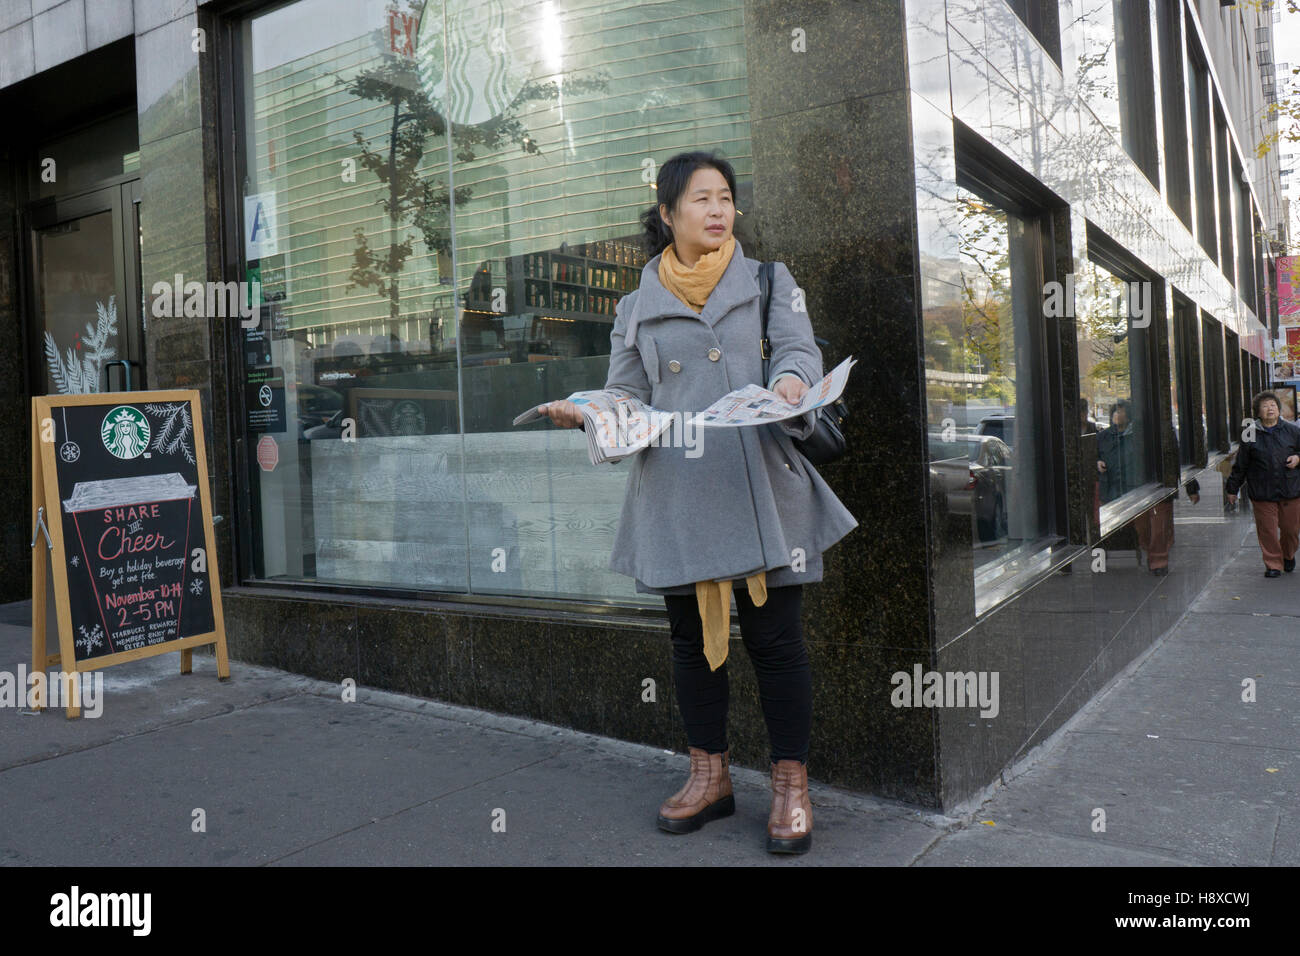 A Chinese woman handing out flyers outside Starbucks on Main Street in Chinatown, Flushing, Queens, New York City Stock Photo